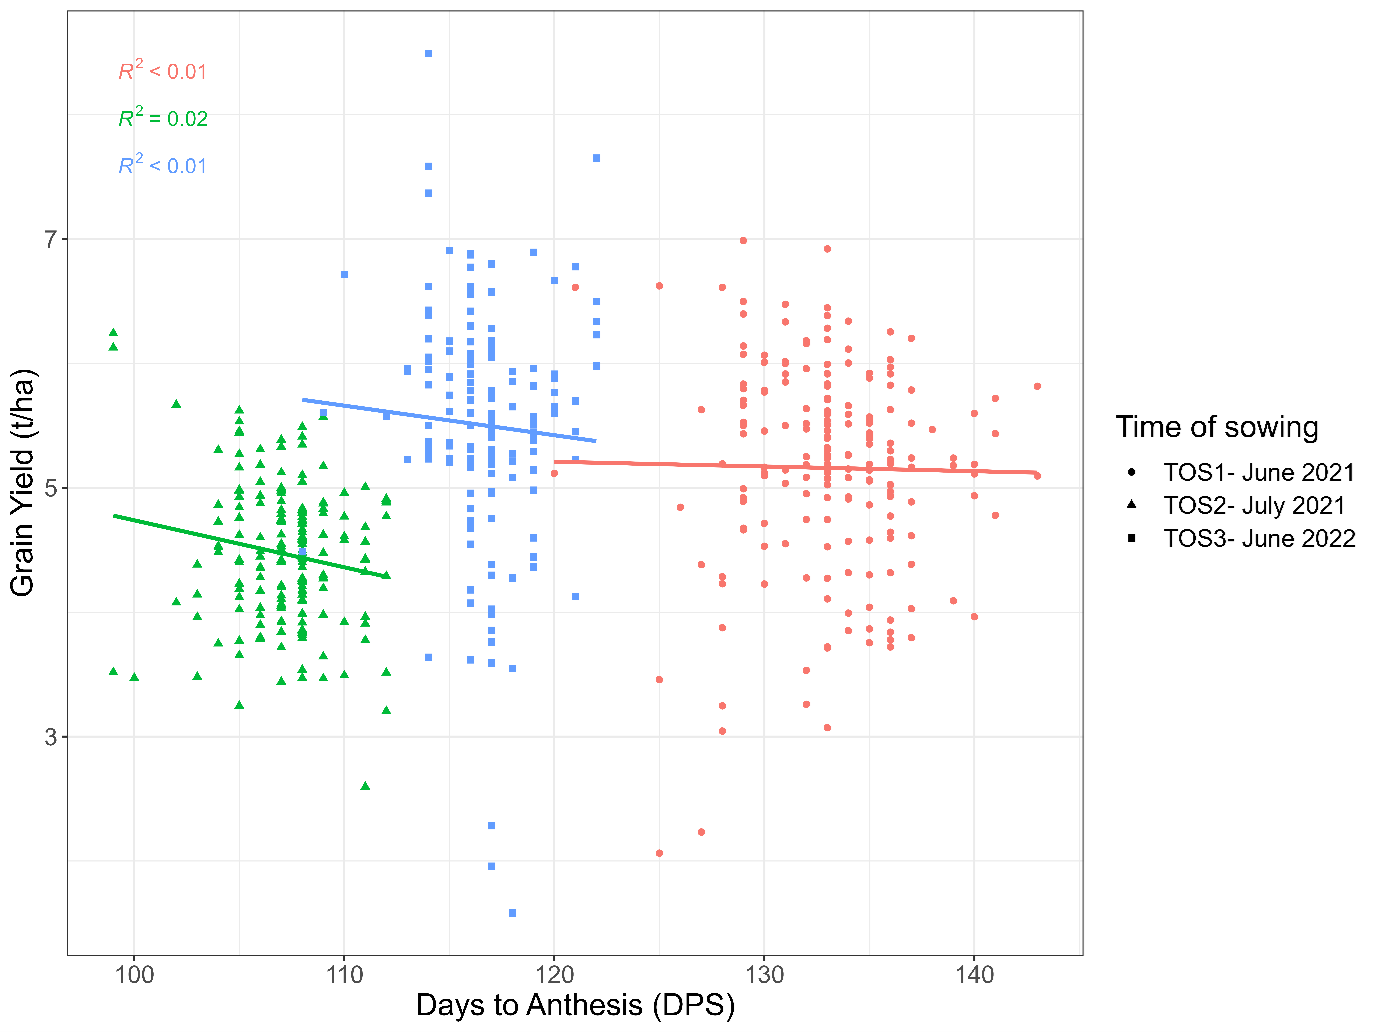 Two years of field experiments using elite high vigour wheat genotypes reveal no correlation between days to anthesis and final grain yield, regardless of the year or time of sowing.